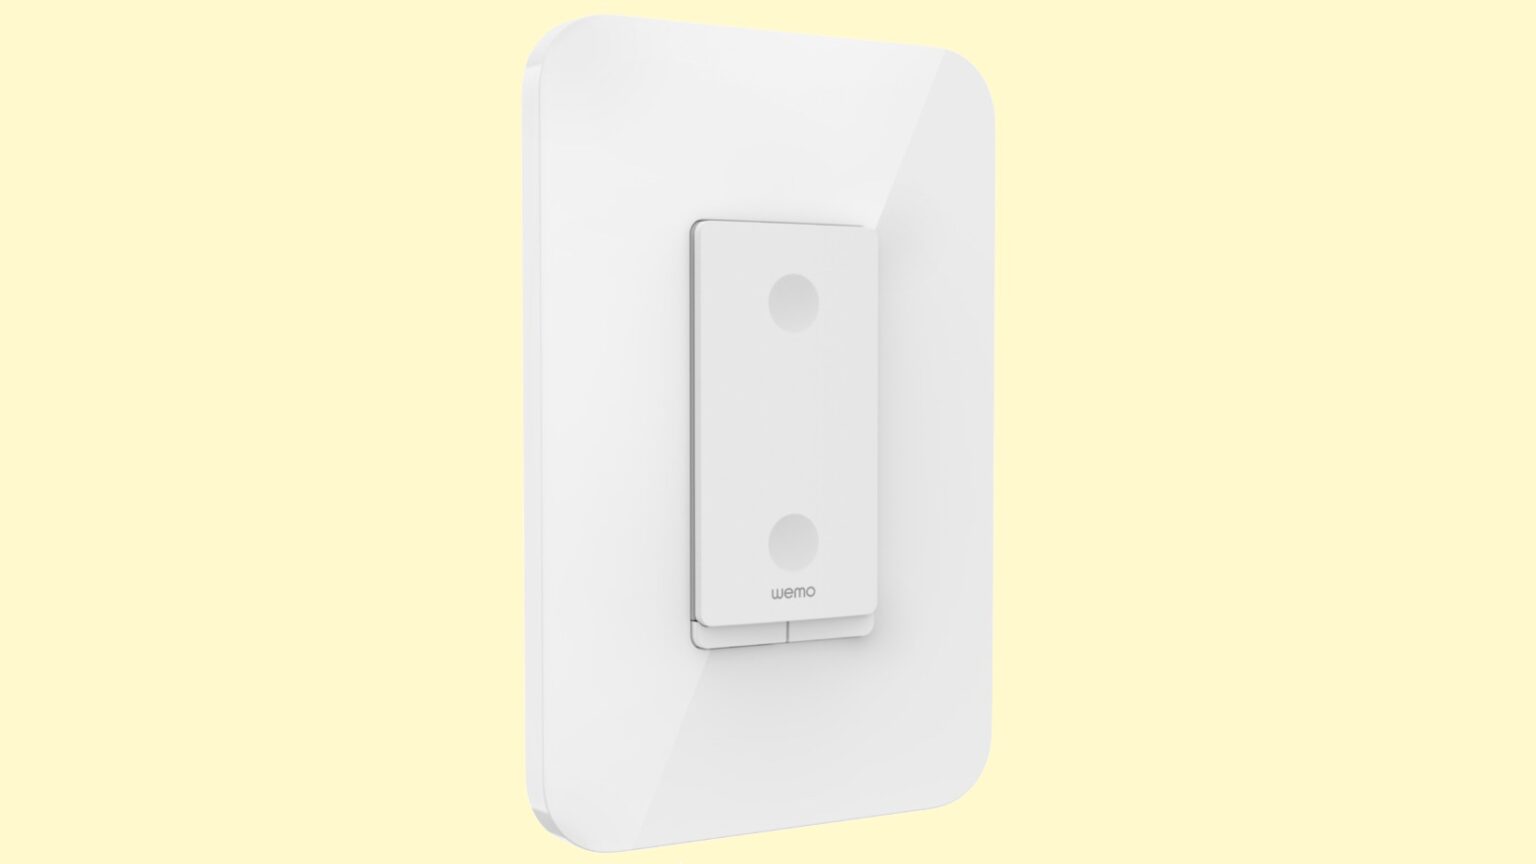 Wemo products like this dimmer switch work with HomeKit over Thread, but forget about Matter certification for now.